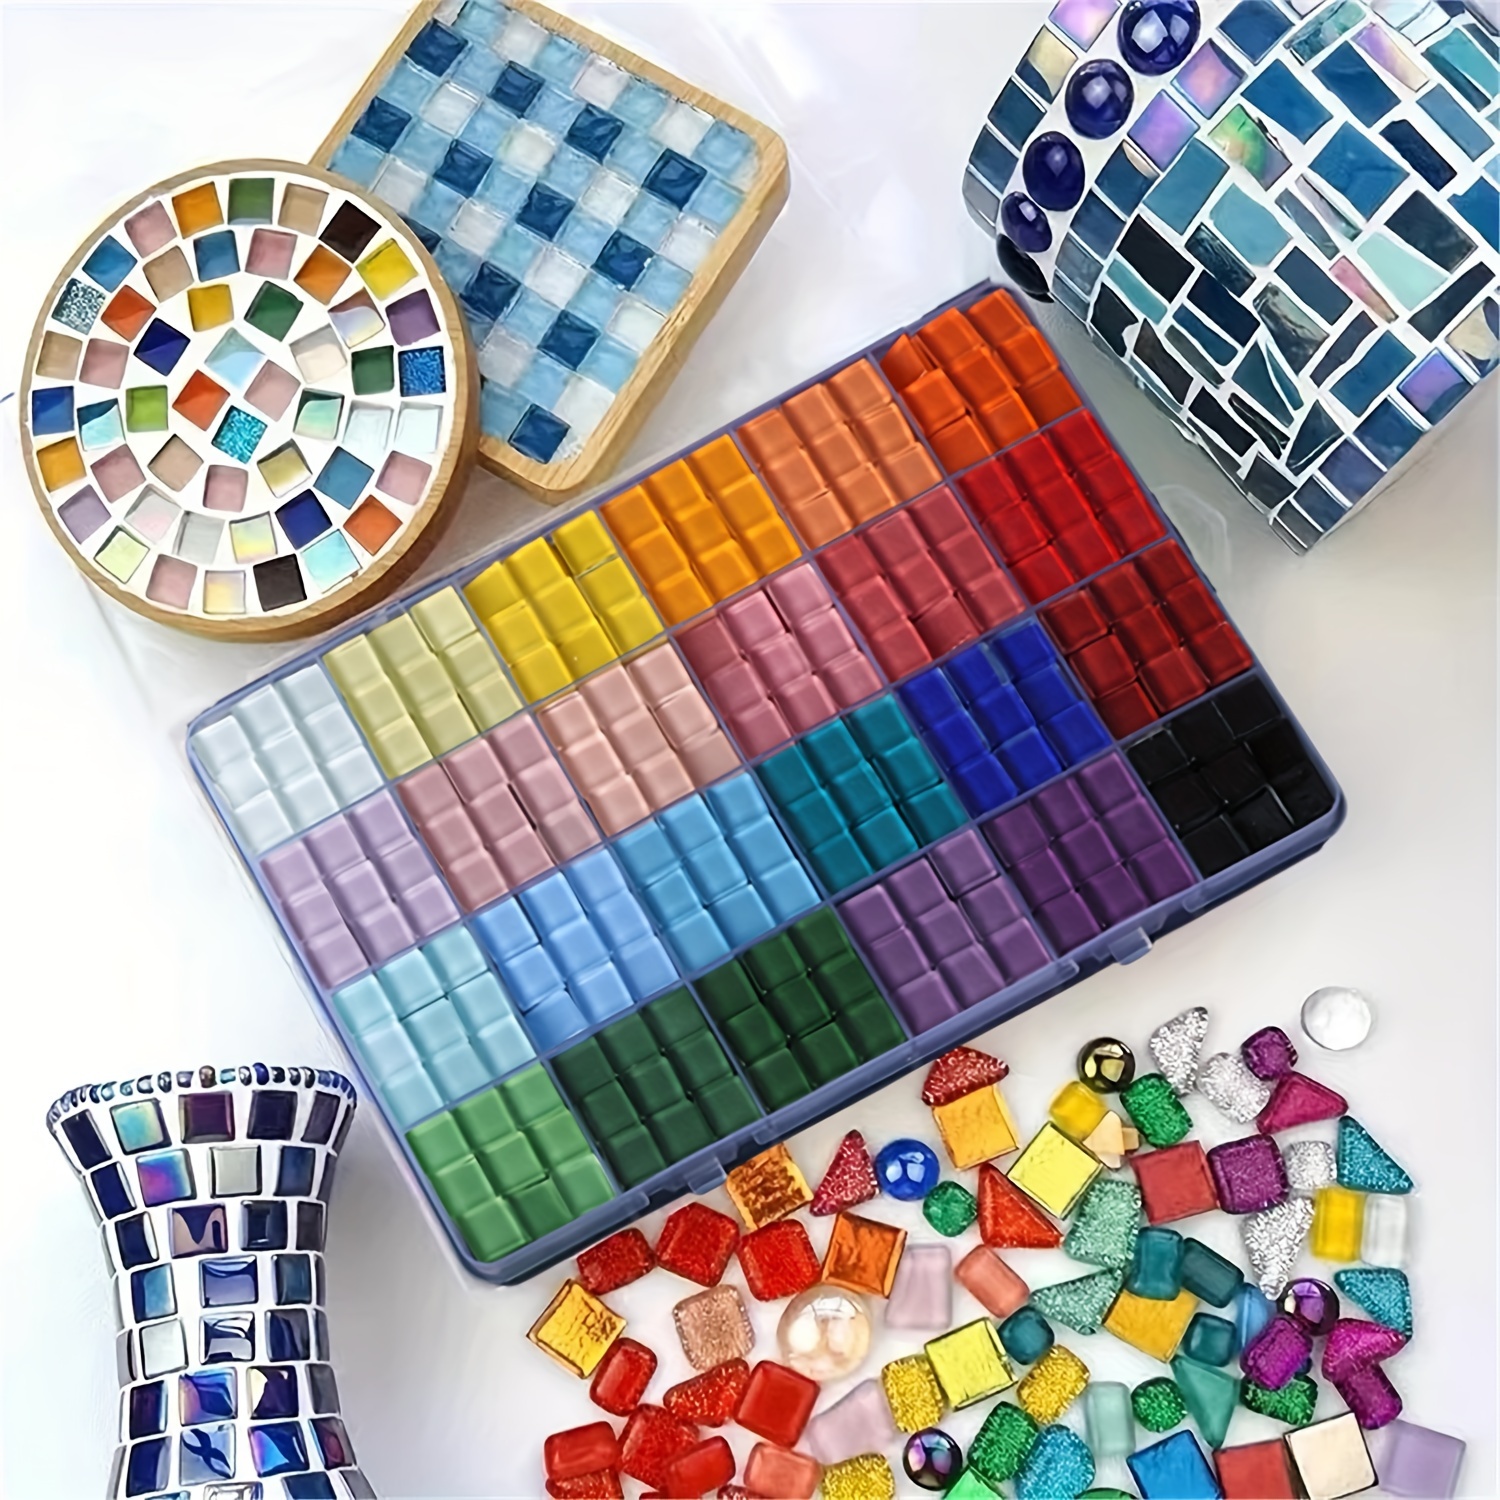 

720 Pcs 24-grid Glass Mosaic Patchs, 0.39inch/0.99cm, Diy Craft Supplies For Handmade Projects